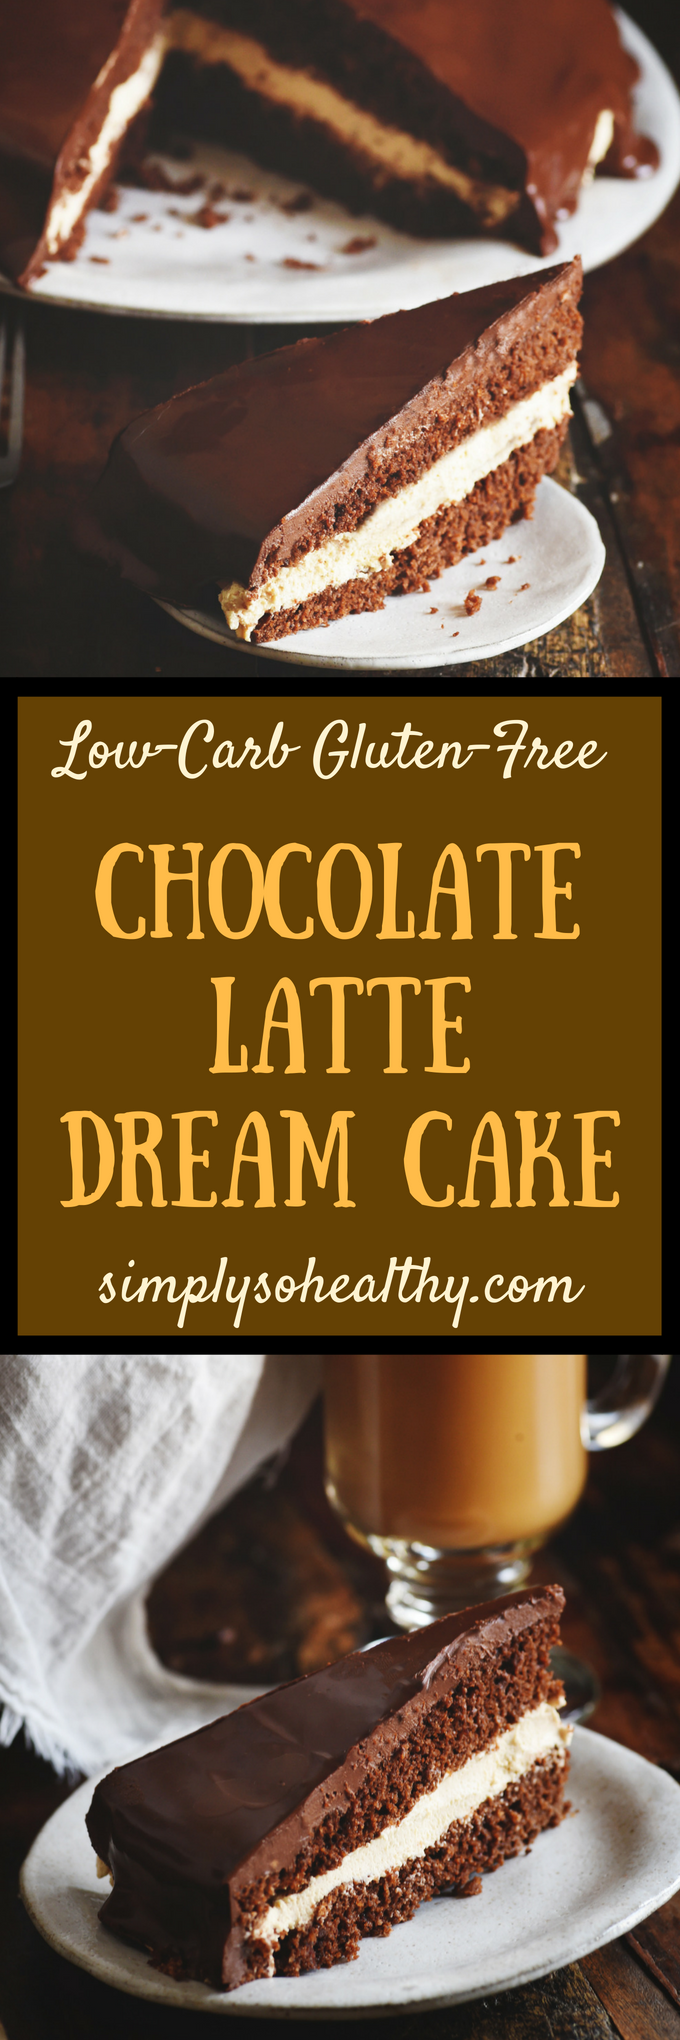 LowCarb Chocolate Latte Dream Cake  Simply So Healthy